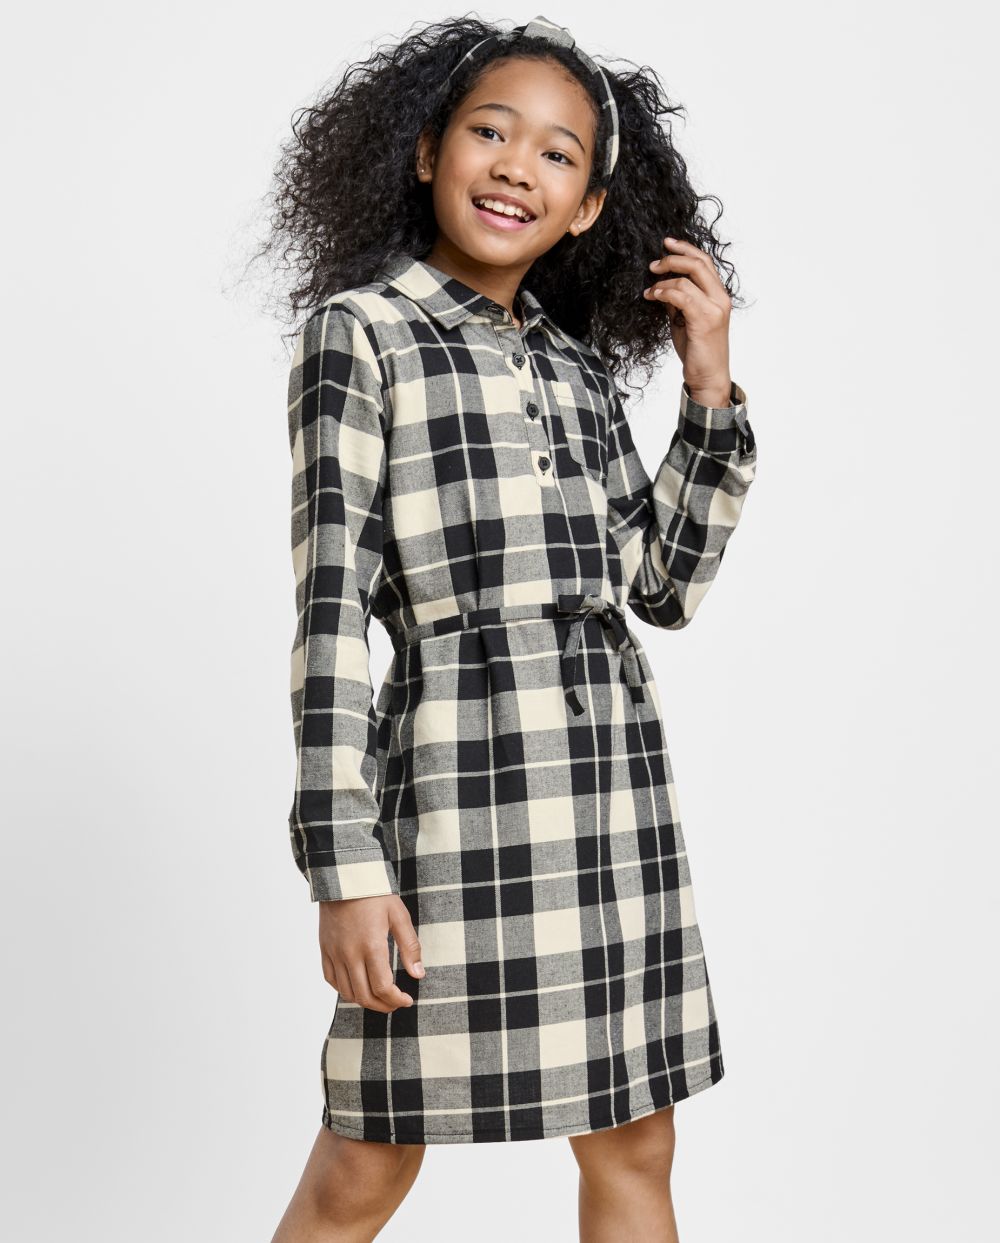 Girls Plaid Print Above the Knee Pocketed Self Tie Belted Tie Waist Waistline Collared Long Sleeves Shirt Dress